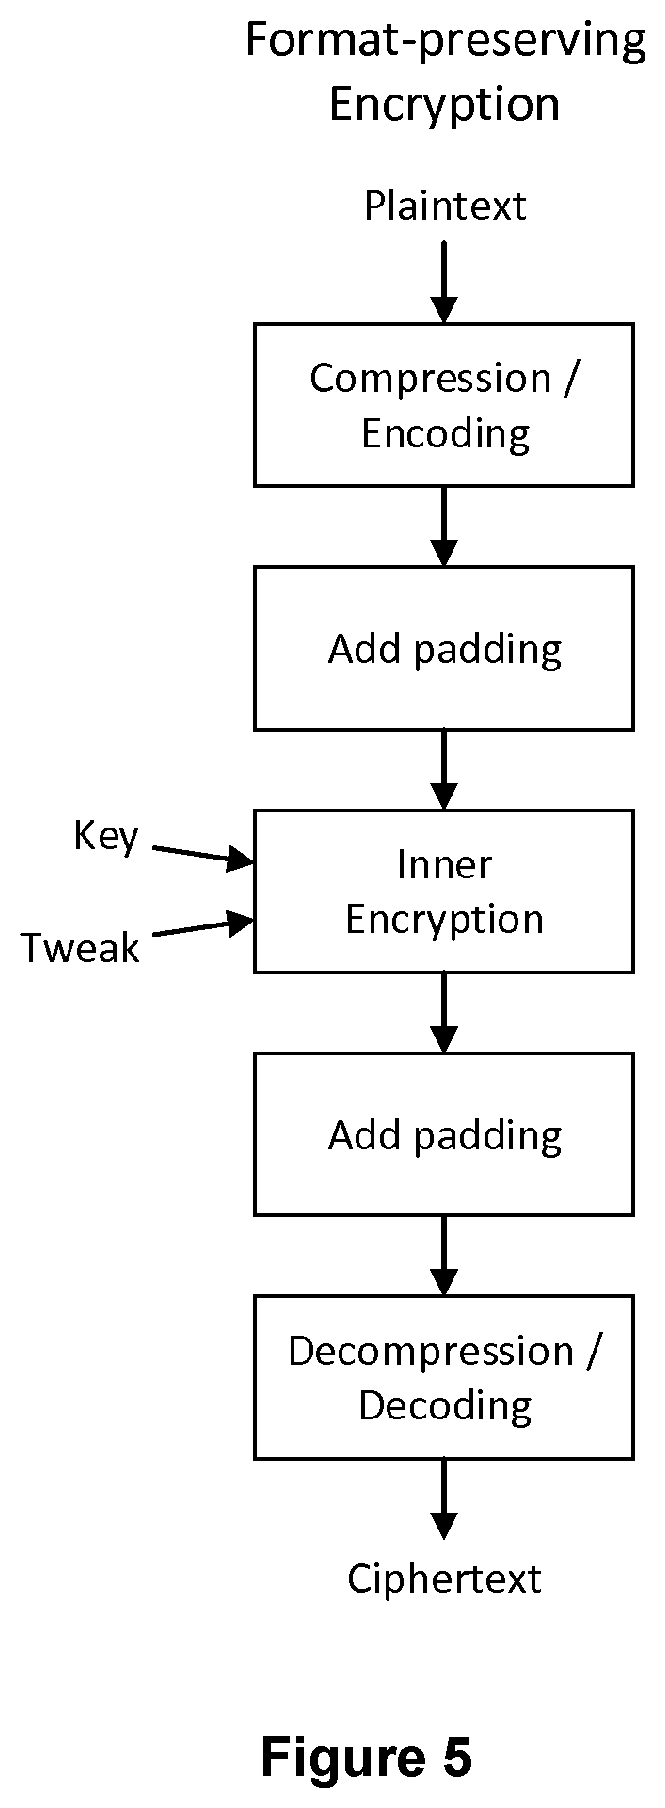 A computer-implemented method of performing format-preserving encryption of a data object of variable size